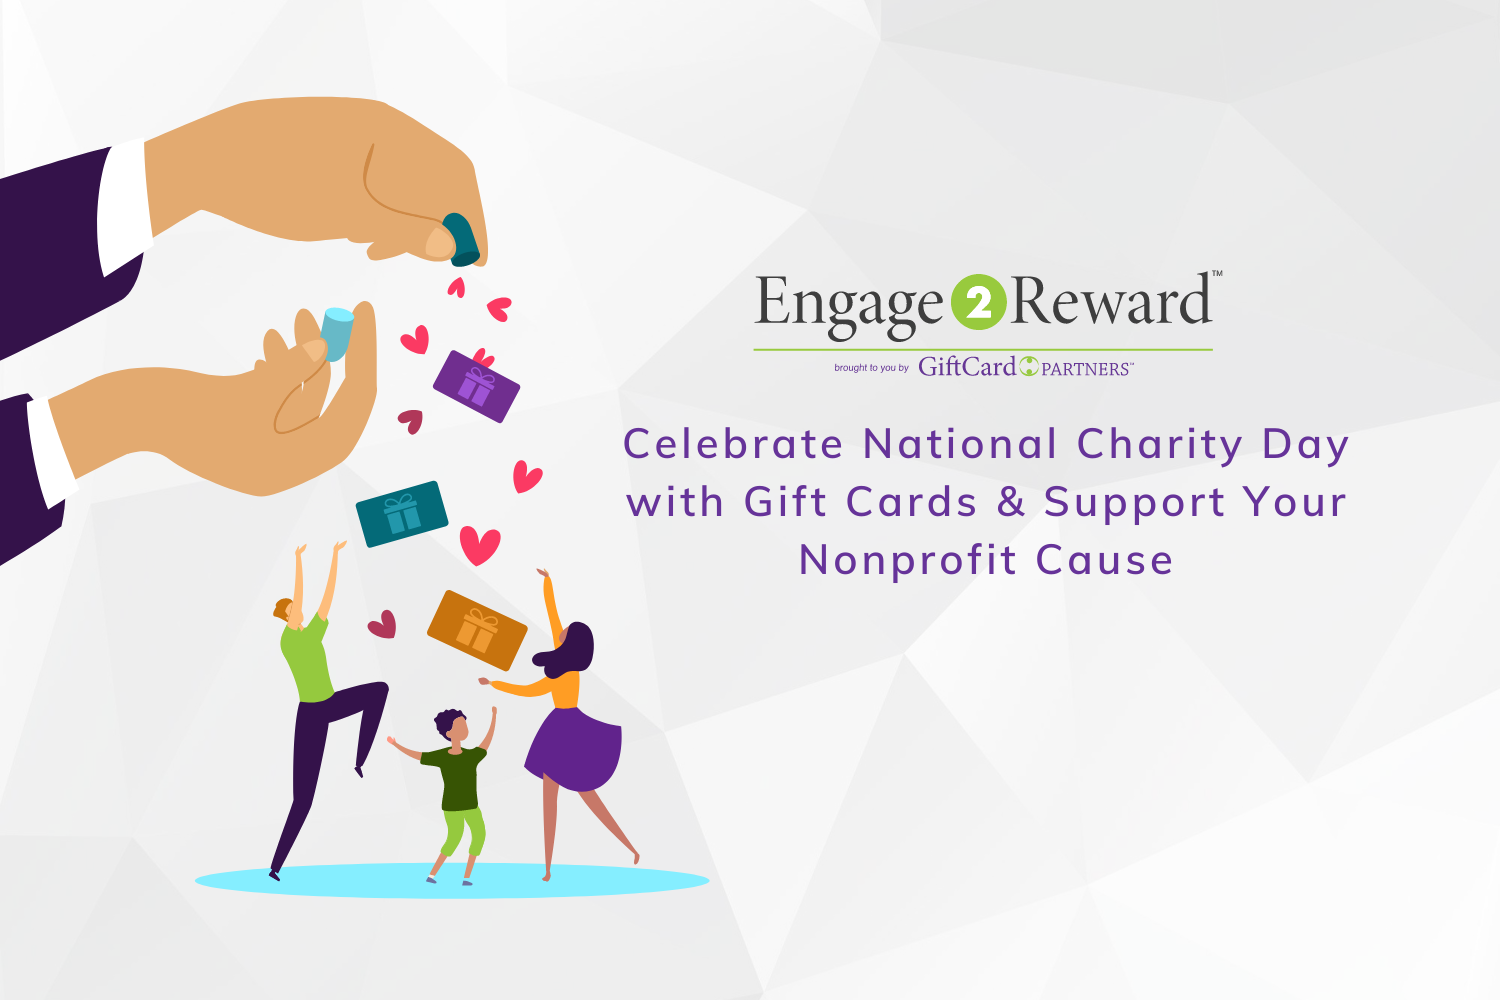 Celebrate National Charity Day with Gift Cards & Support Your Nonprofit Cause